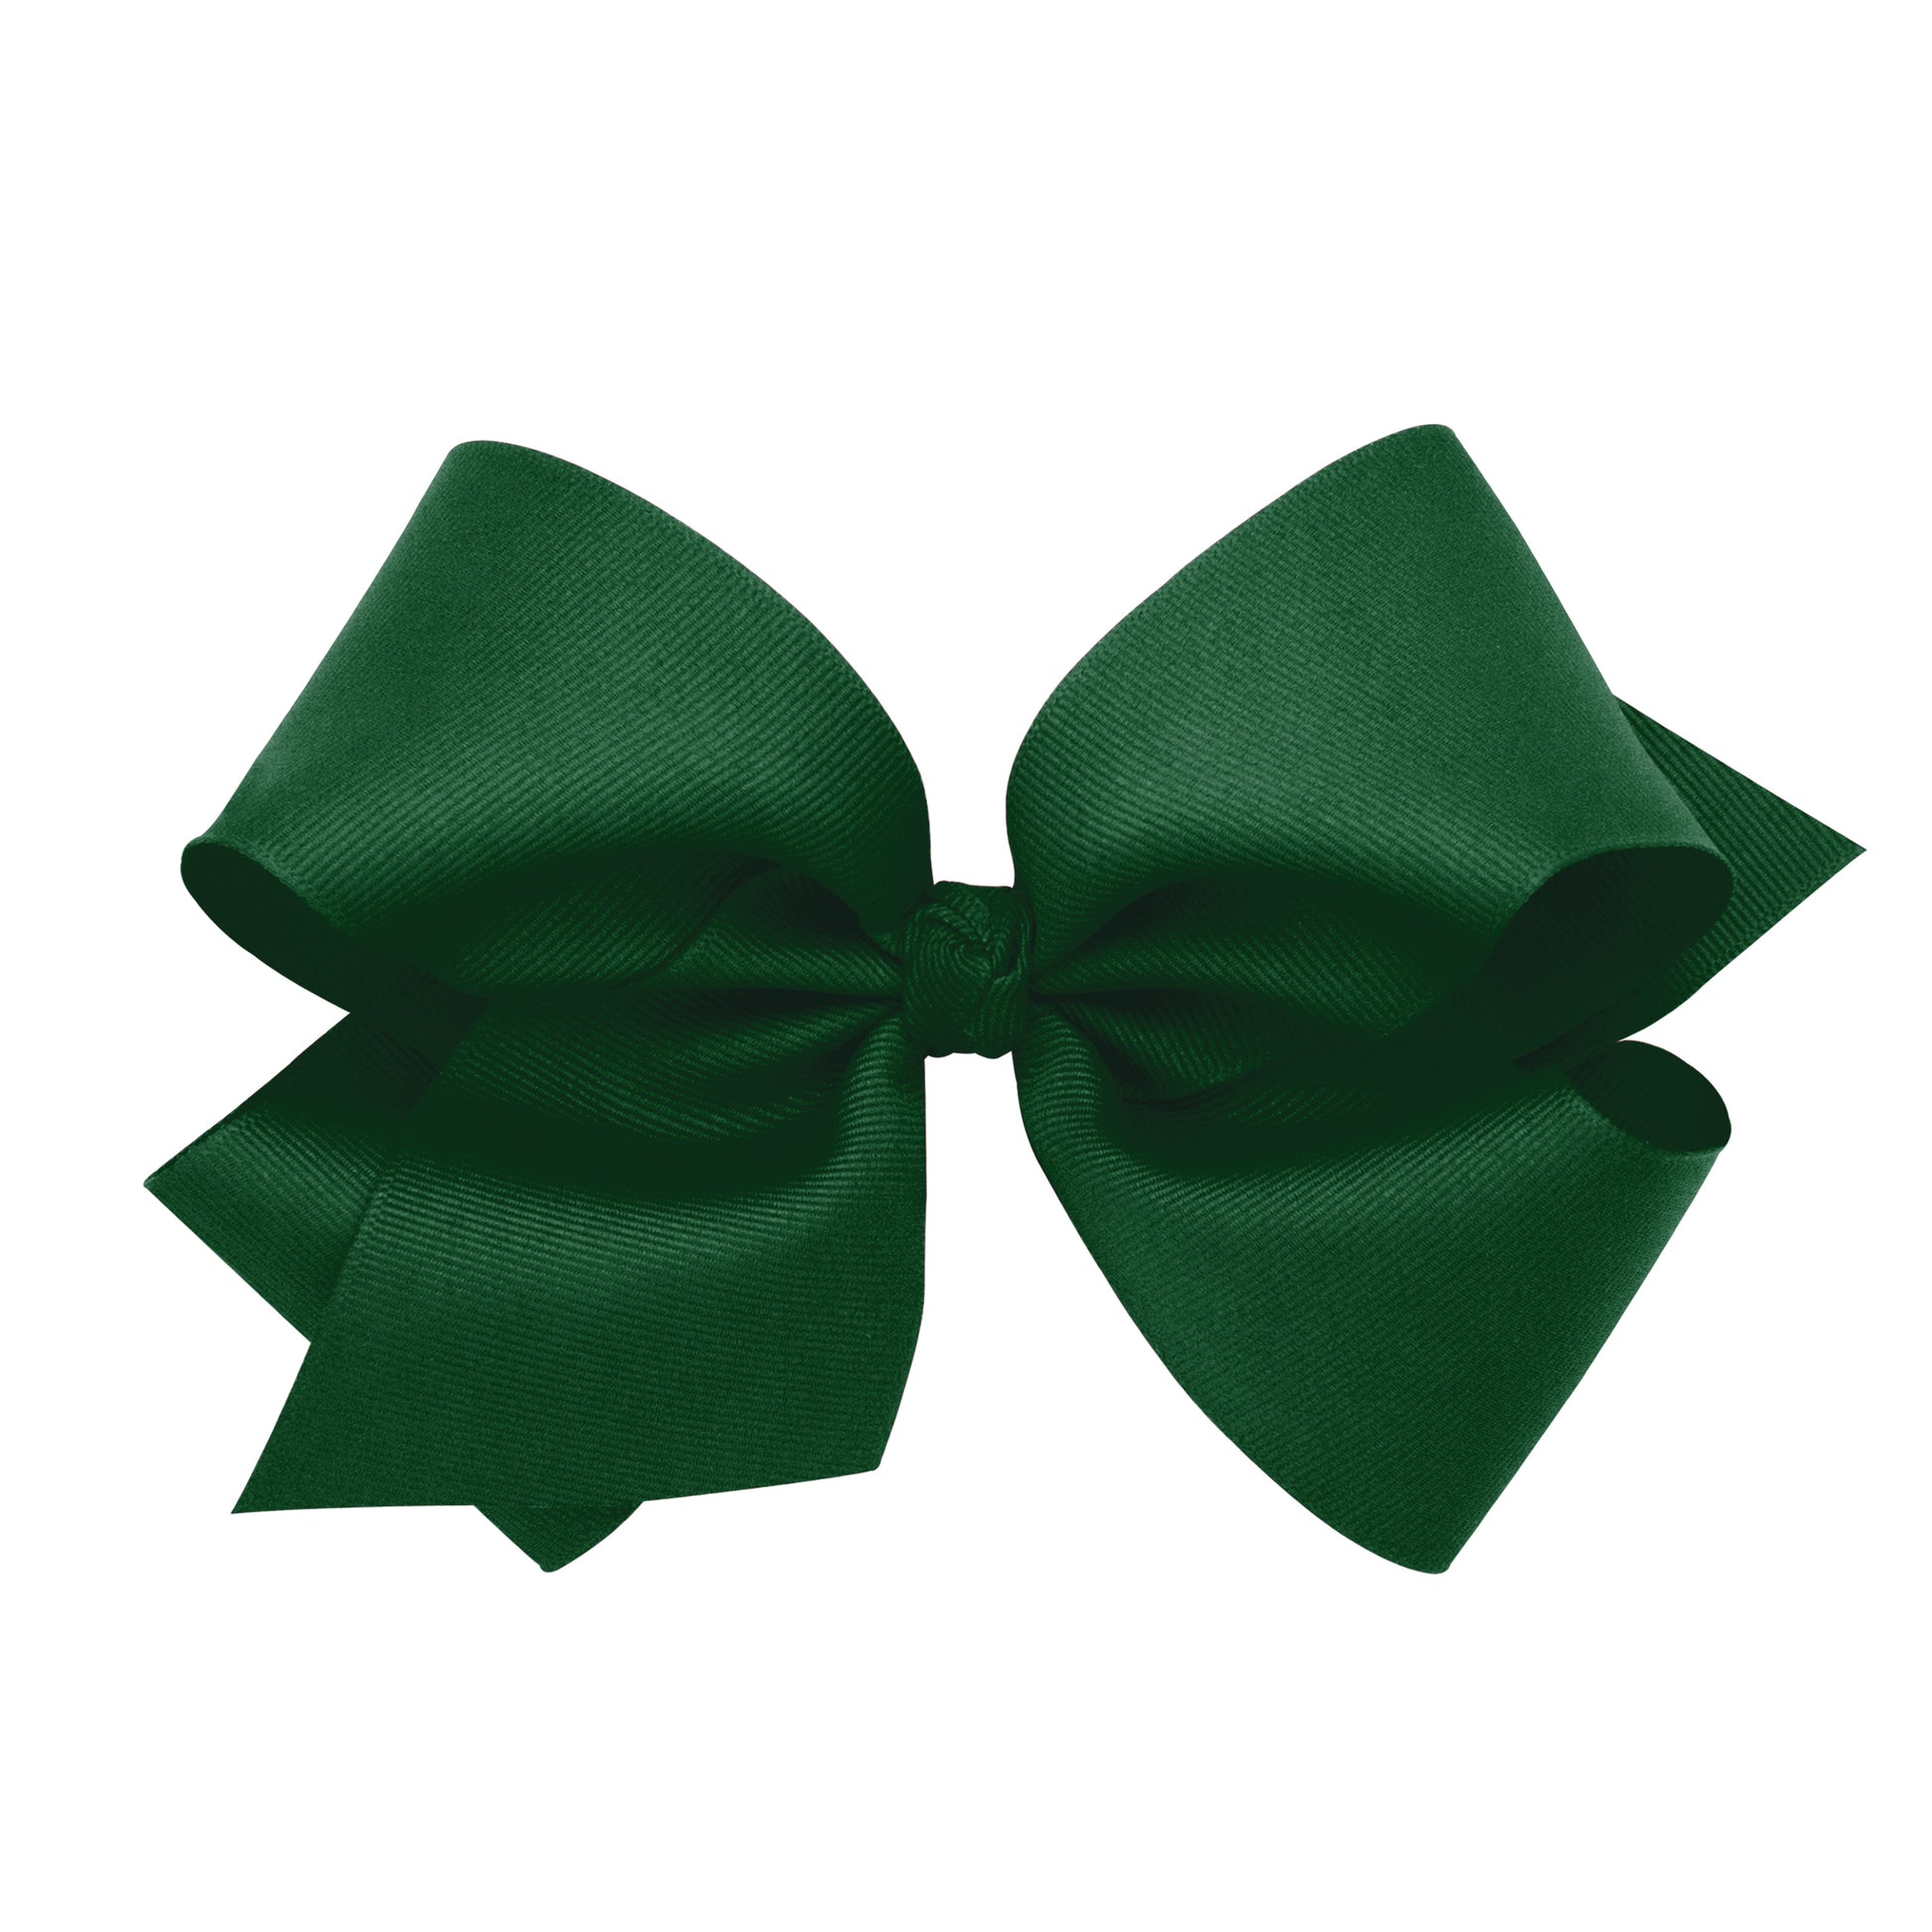 Wee Ones King Grosgrain Hair Bow with Center Knot - Forest Green